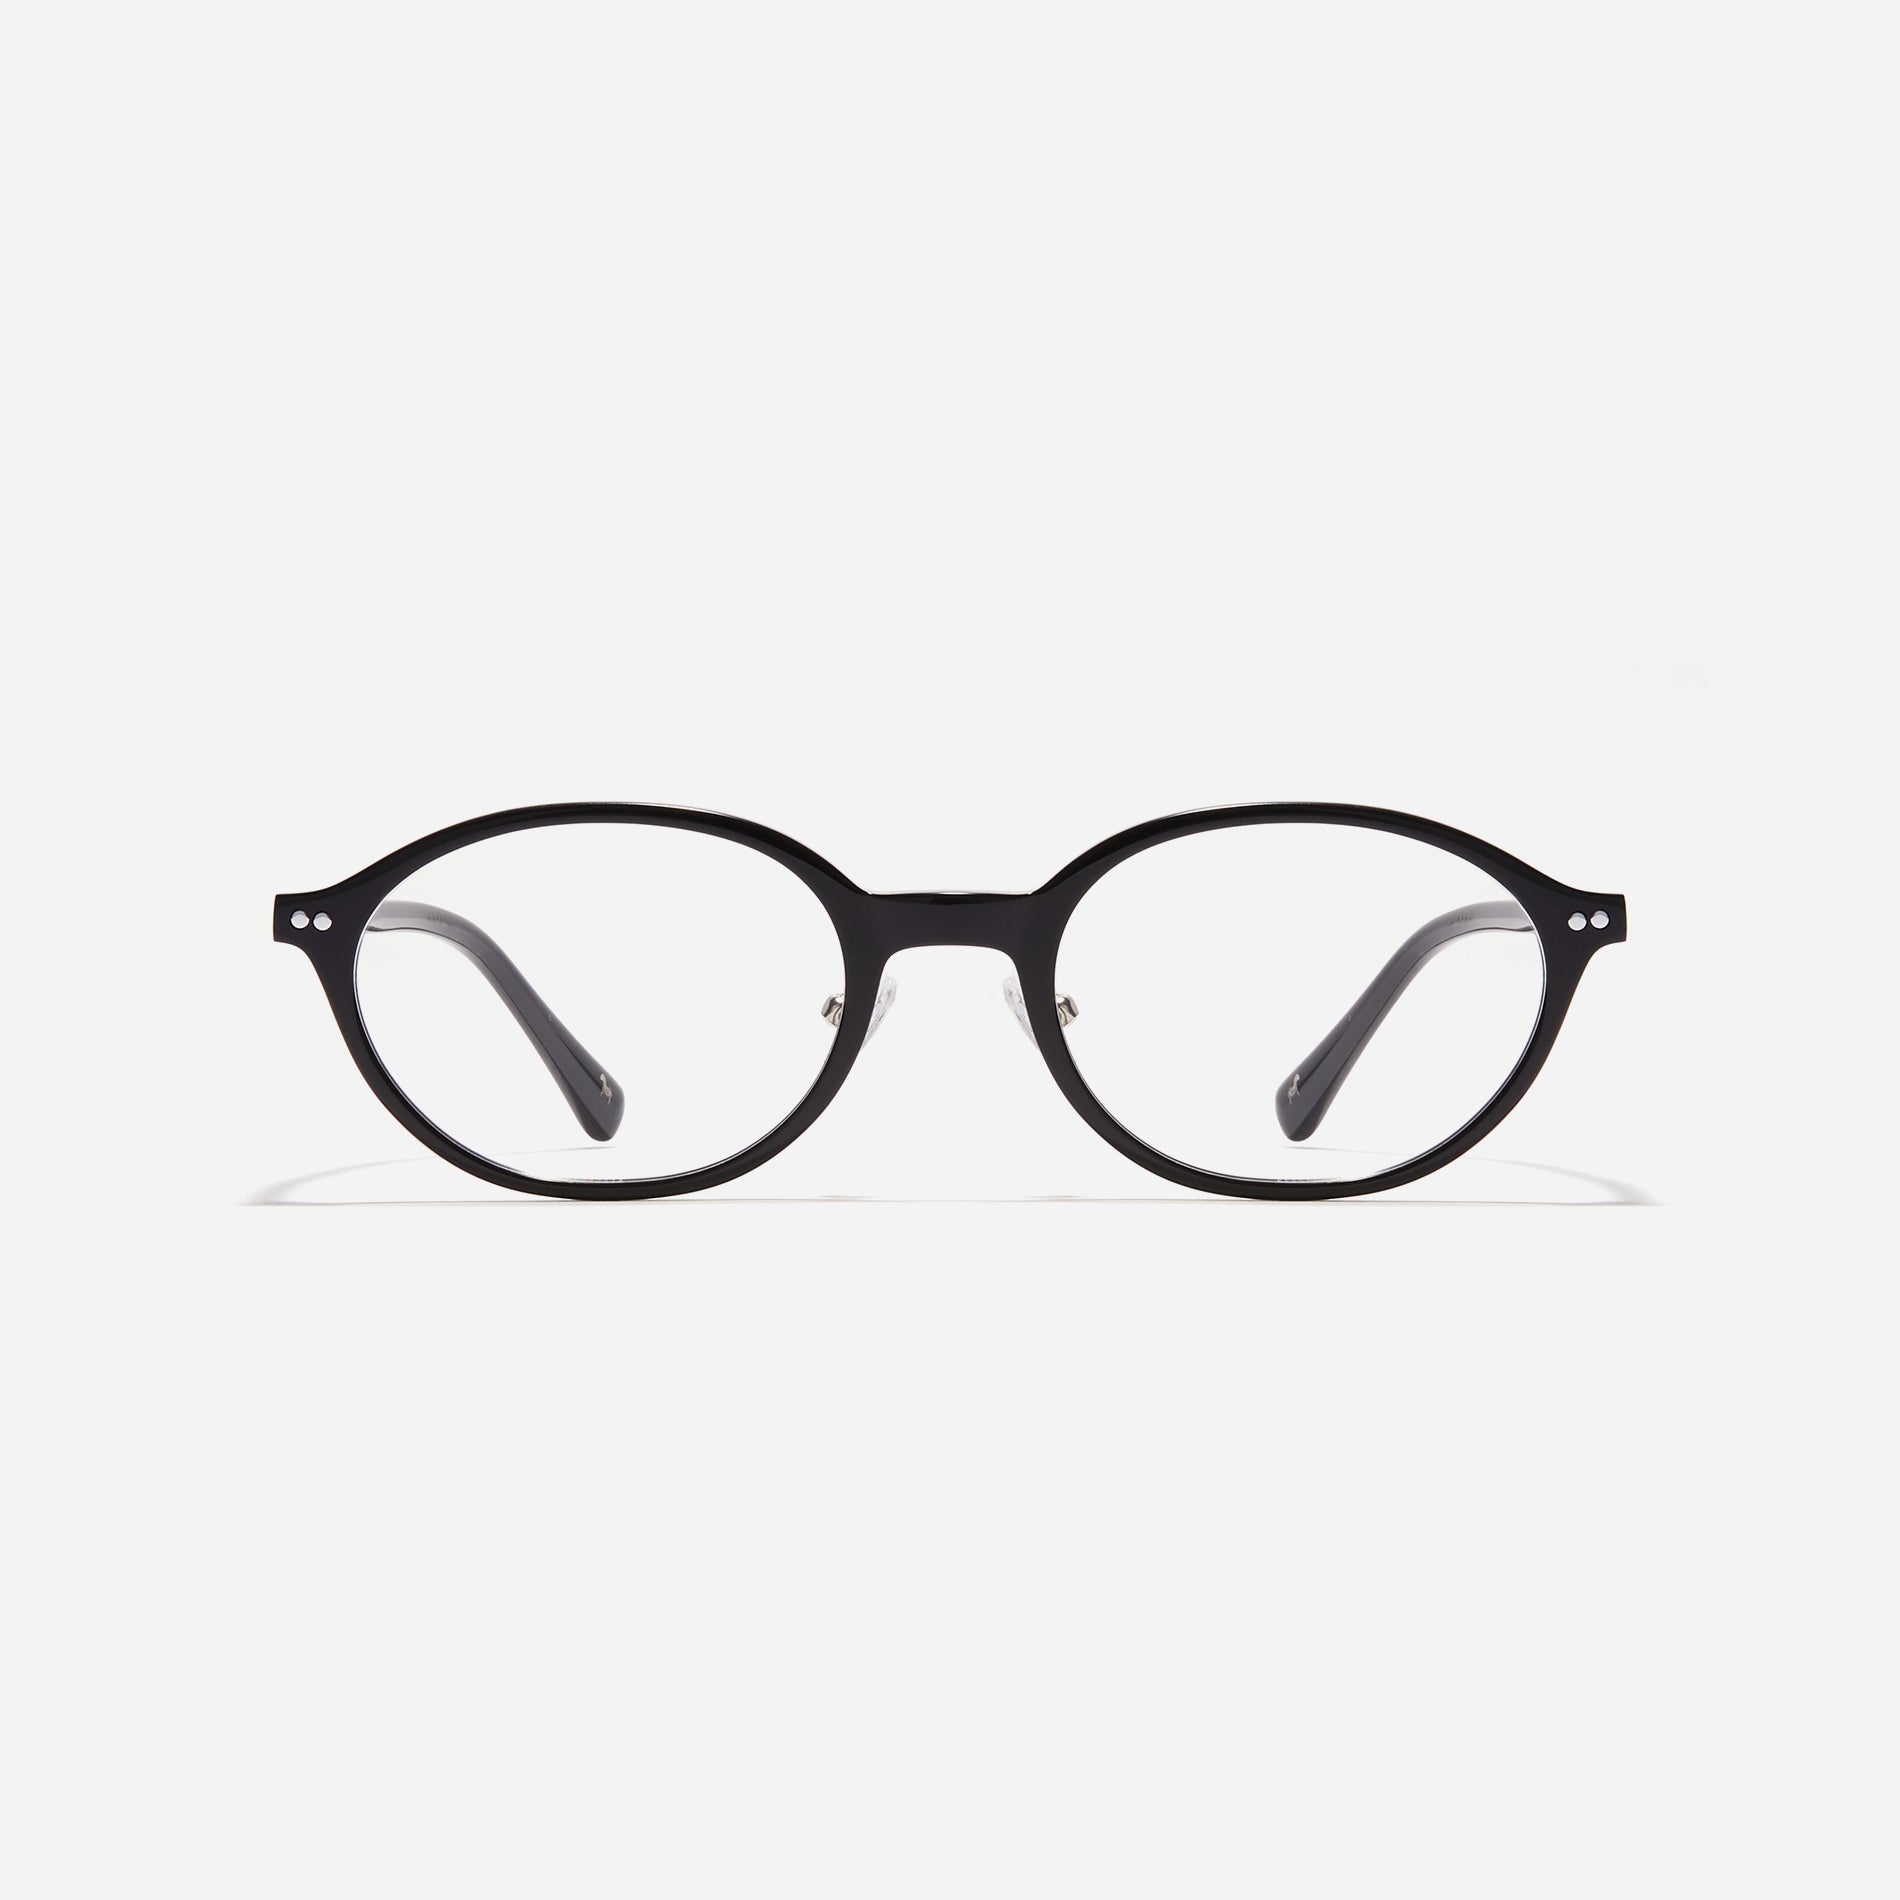 Slim version of CARIN's best-selling 'Aino' eyeglasses. Featuring a trendy oval-round shape and a unique narrow rim design, the Arno S seamlessly blends a retro vibe with modern sensibility. 